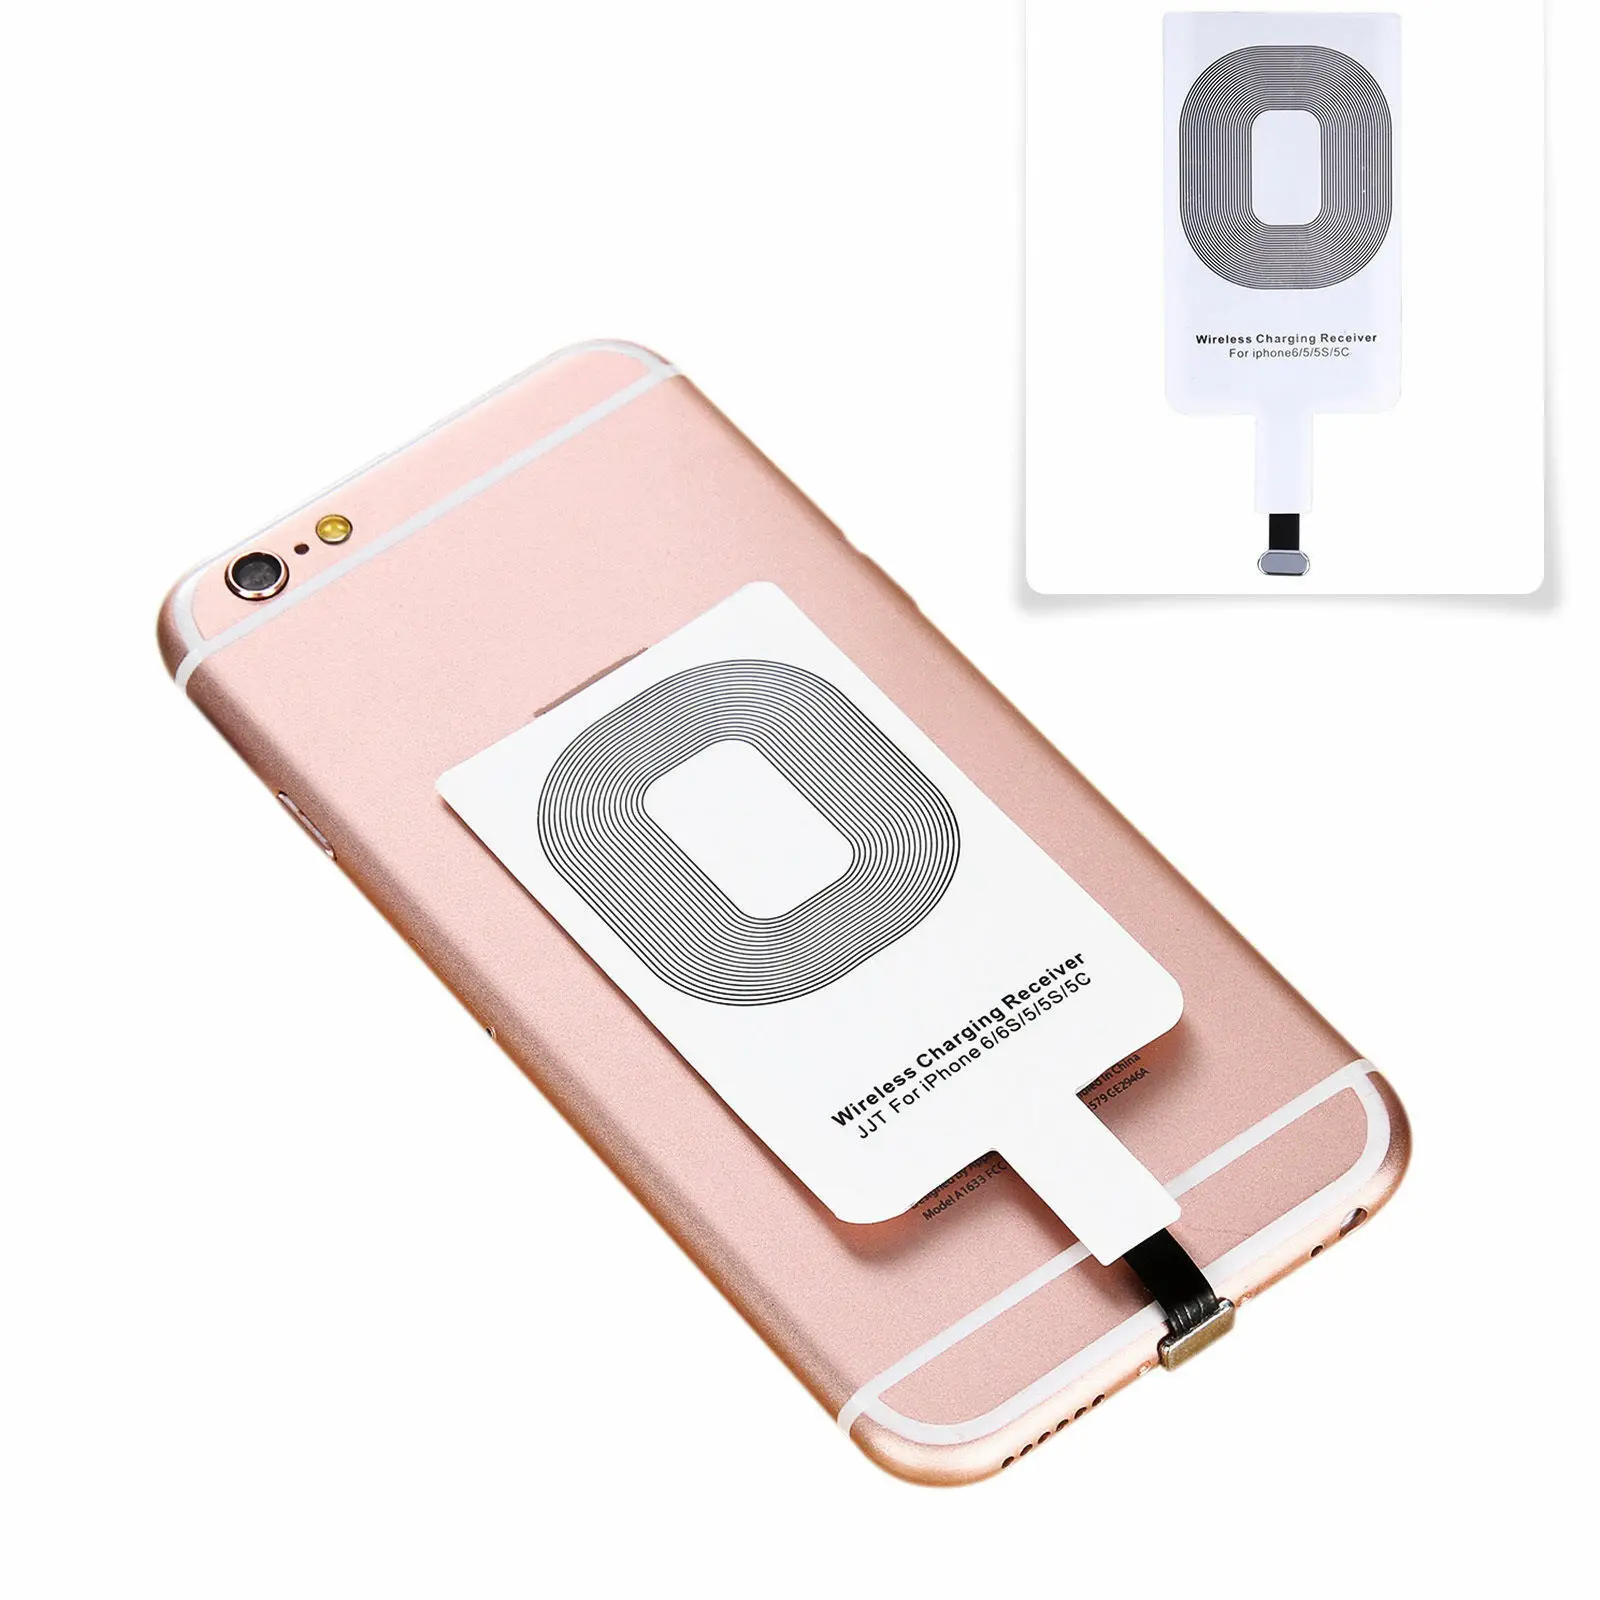 

High Quality Compatible Coil Fast Charging Qi Wireless Phone Charger Receiver Charging Adapter For iPhone 7 6 5, White